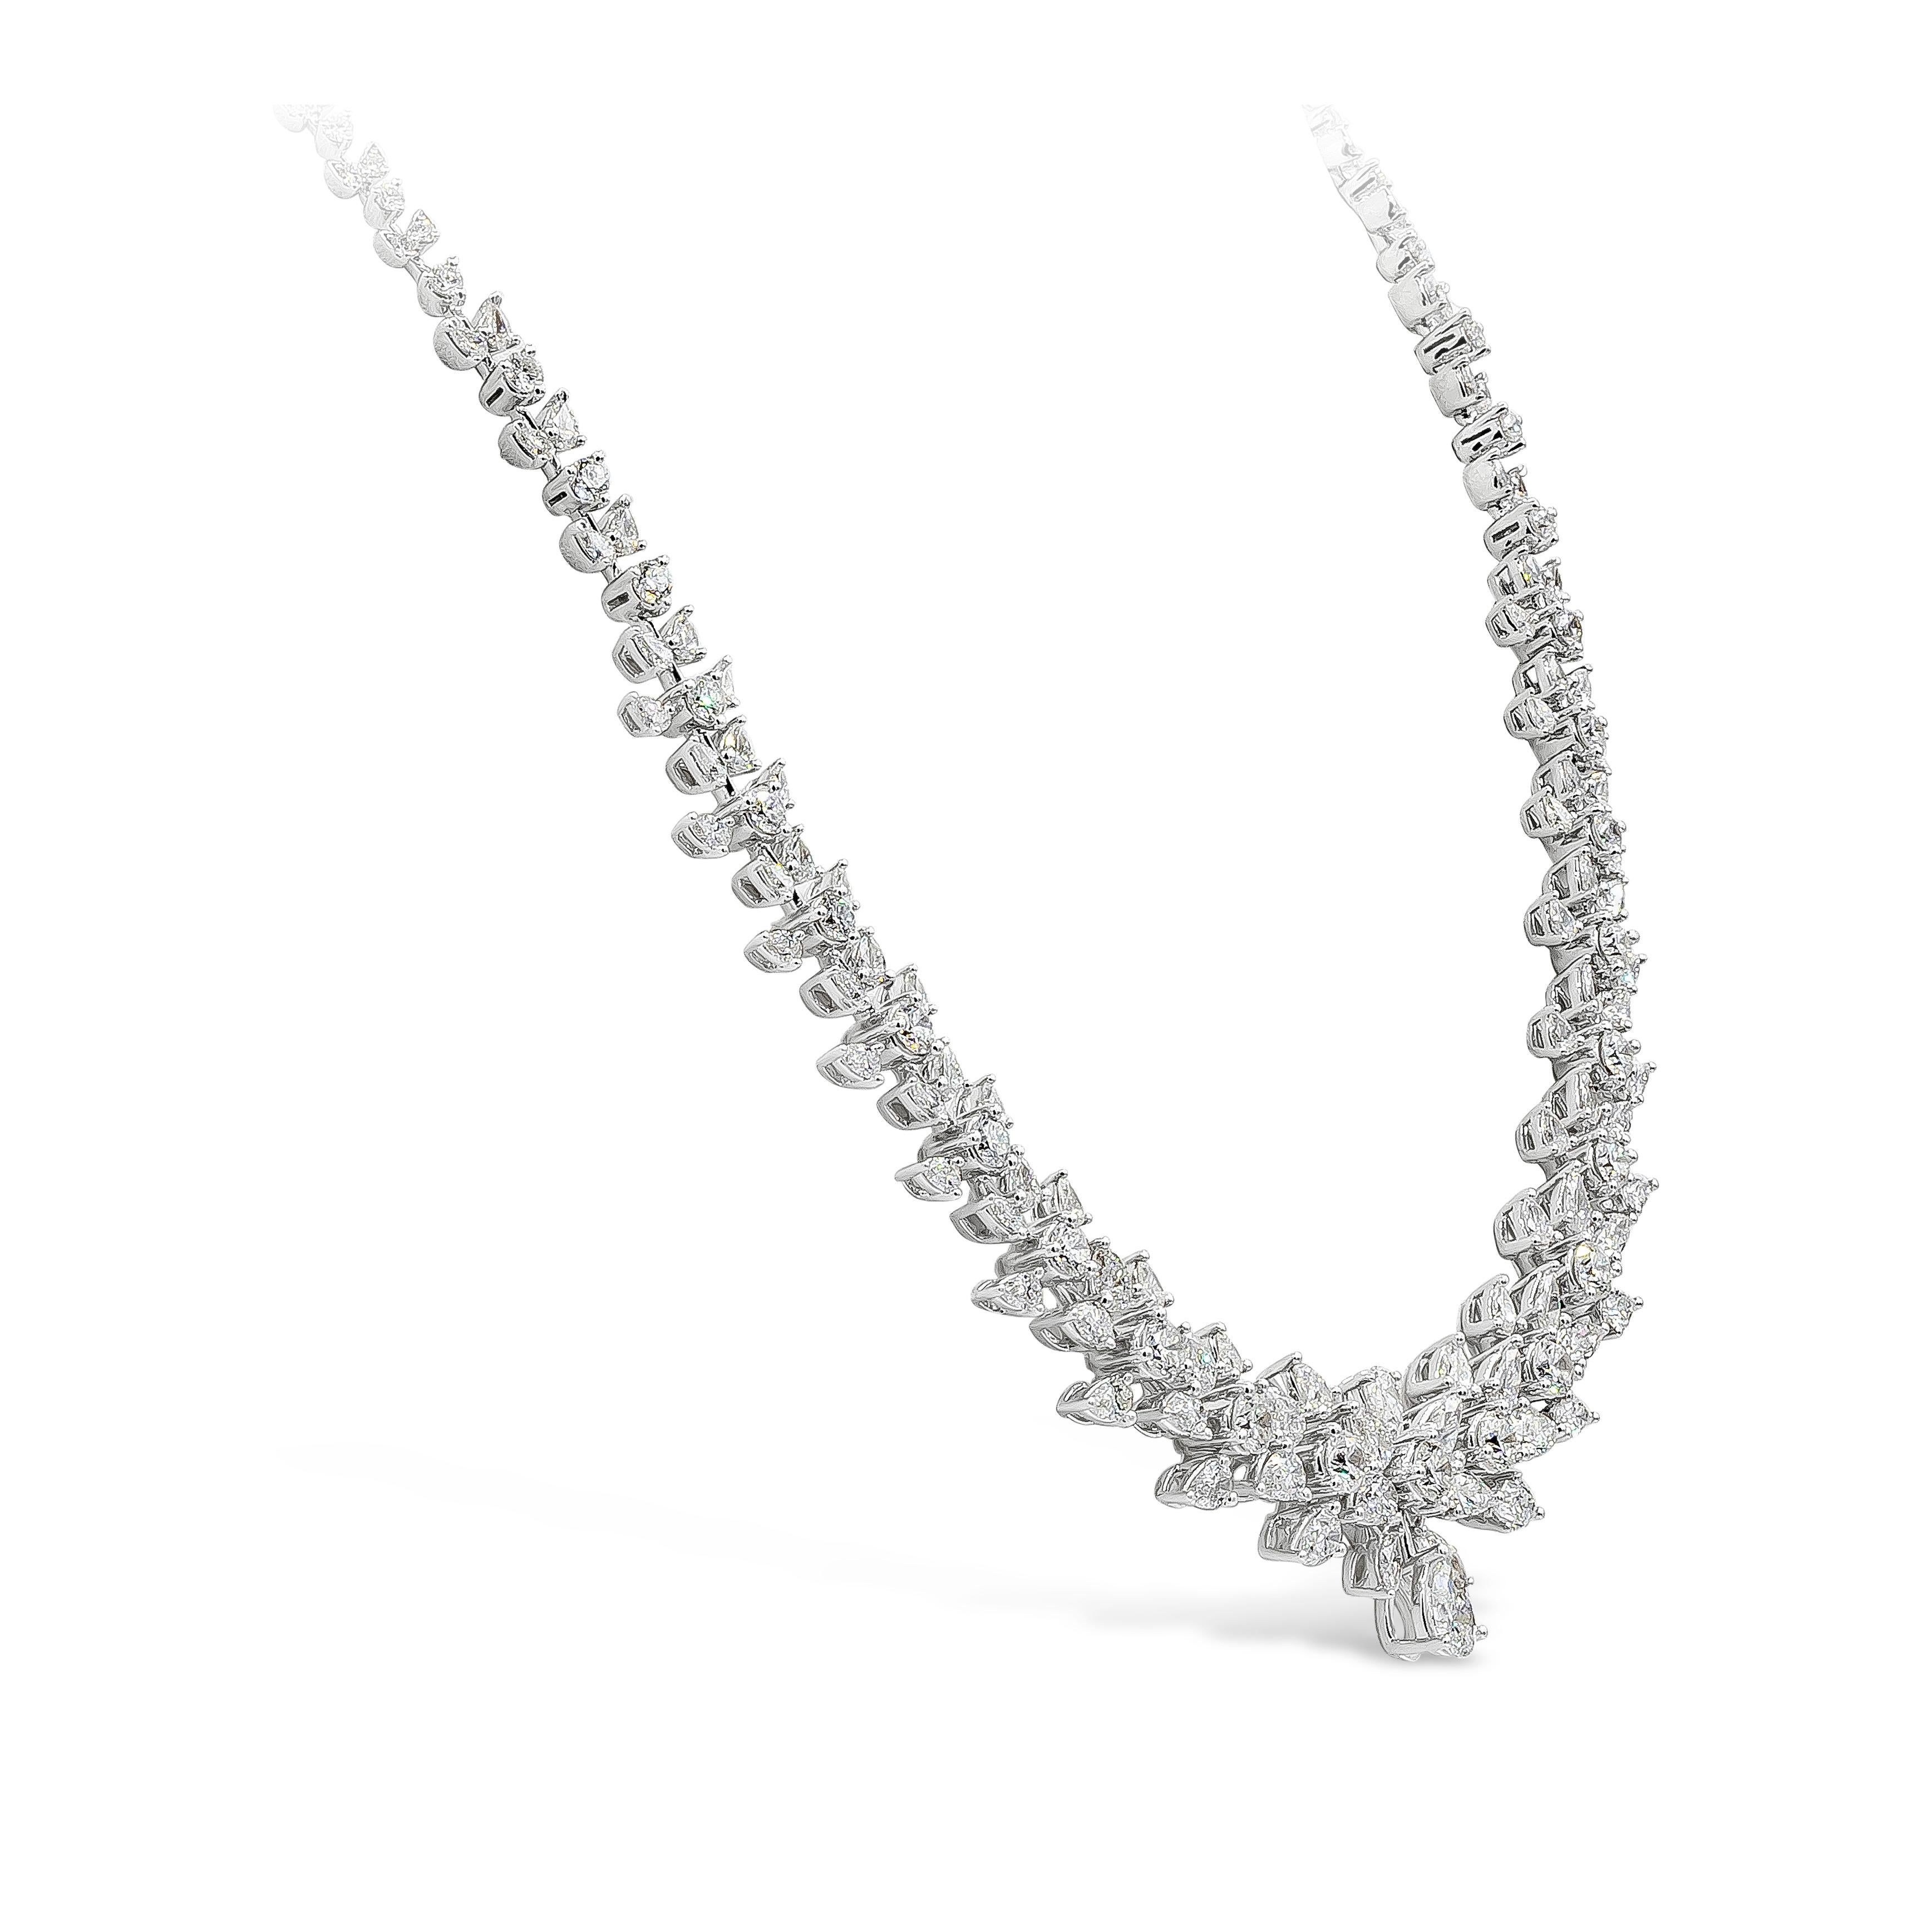 A gorgeous necklace set with 15.01 carats of brilliant round, marquise, and pear shape diamonds in an incredible design. The size of the diamonds graduate larger as it elegantly drops down the neck. Set in 18k white gold and 17.75 inches in length.